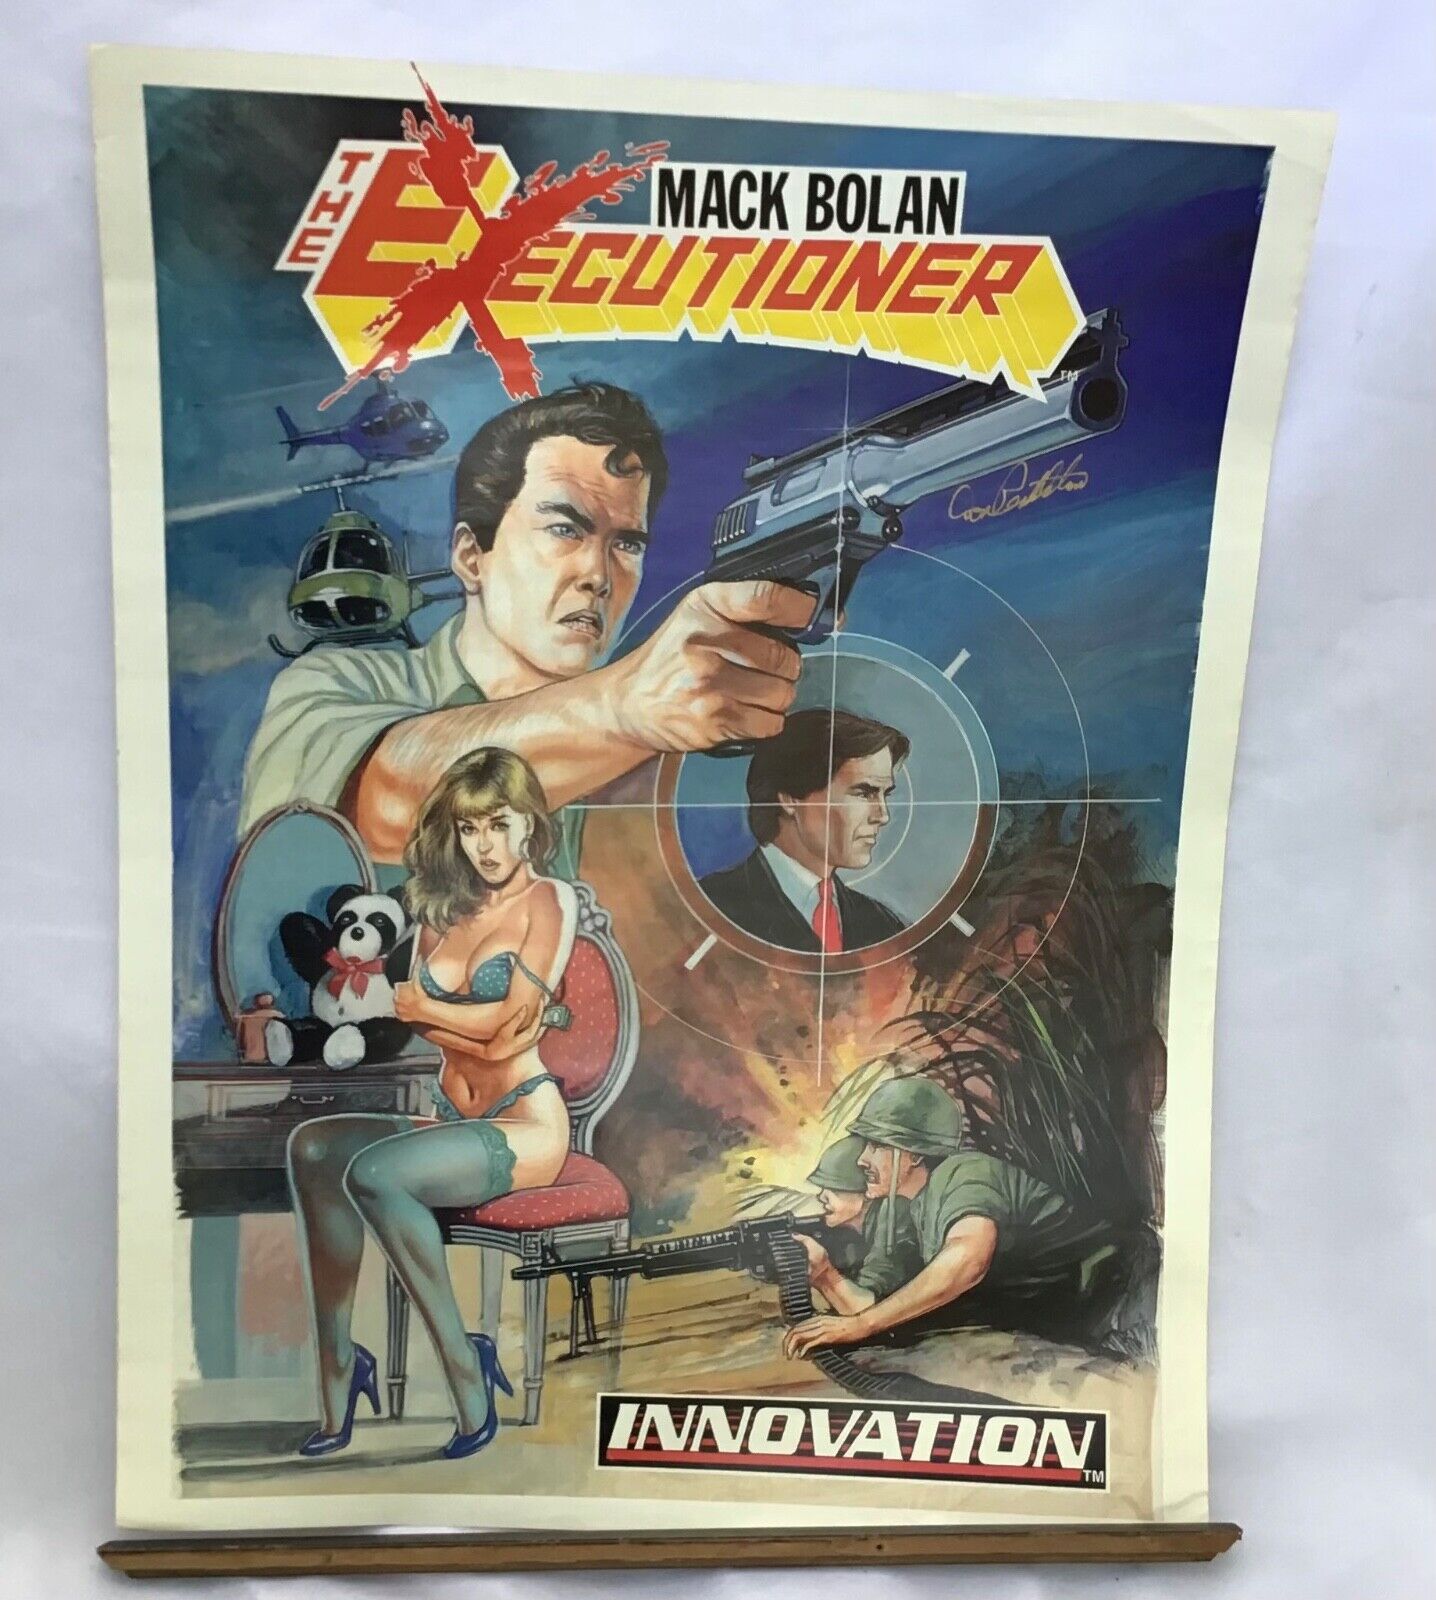 Unfolded Poster Mack Bolan The Executioner  22” x 17”  Innovation Comics